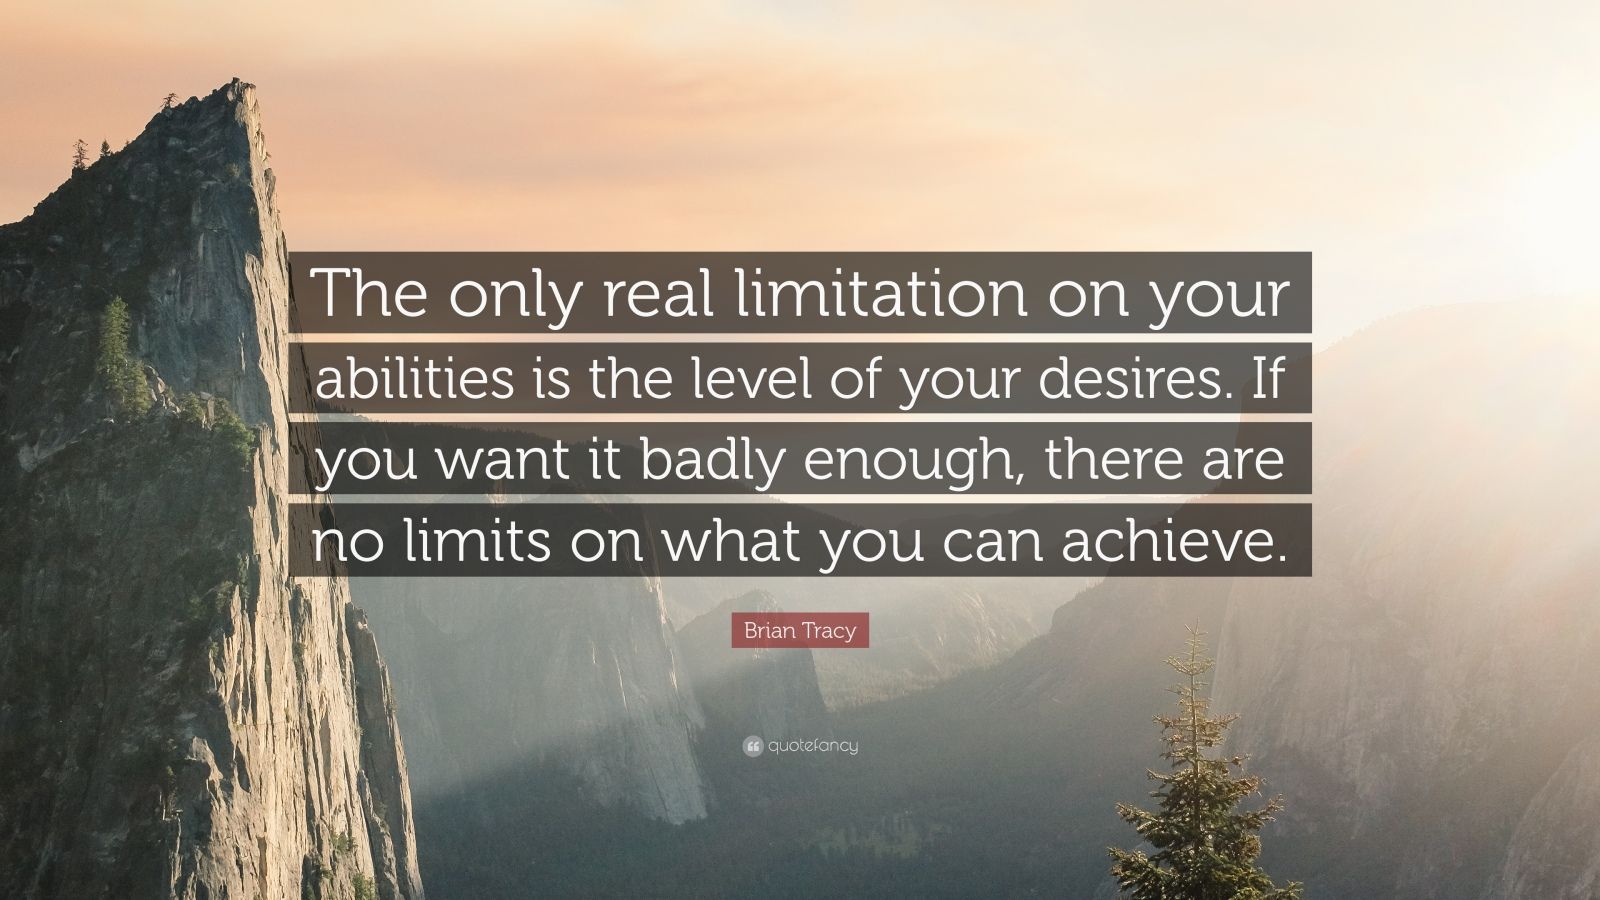 Brian Tracy Quote: “The only real limitation on your abilities is the level of your desires. If you  want it badly enough, there are no limits on what you can achieve.   ”